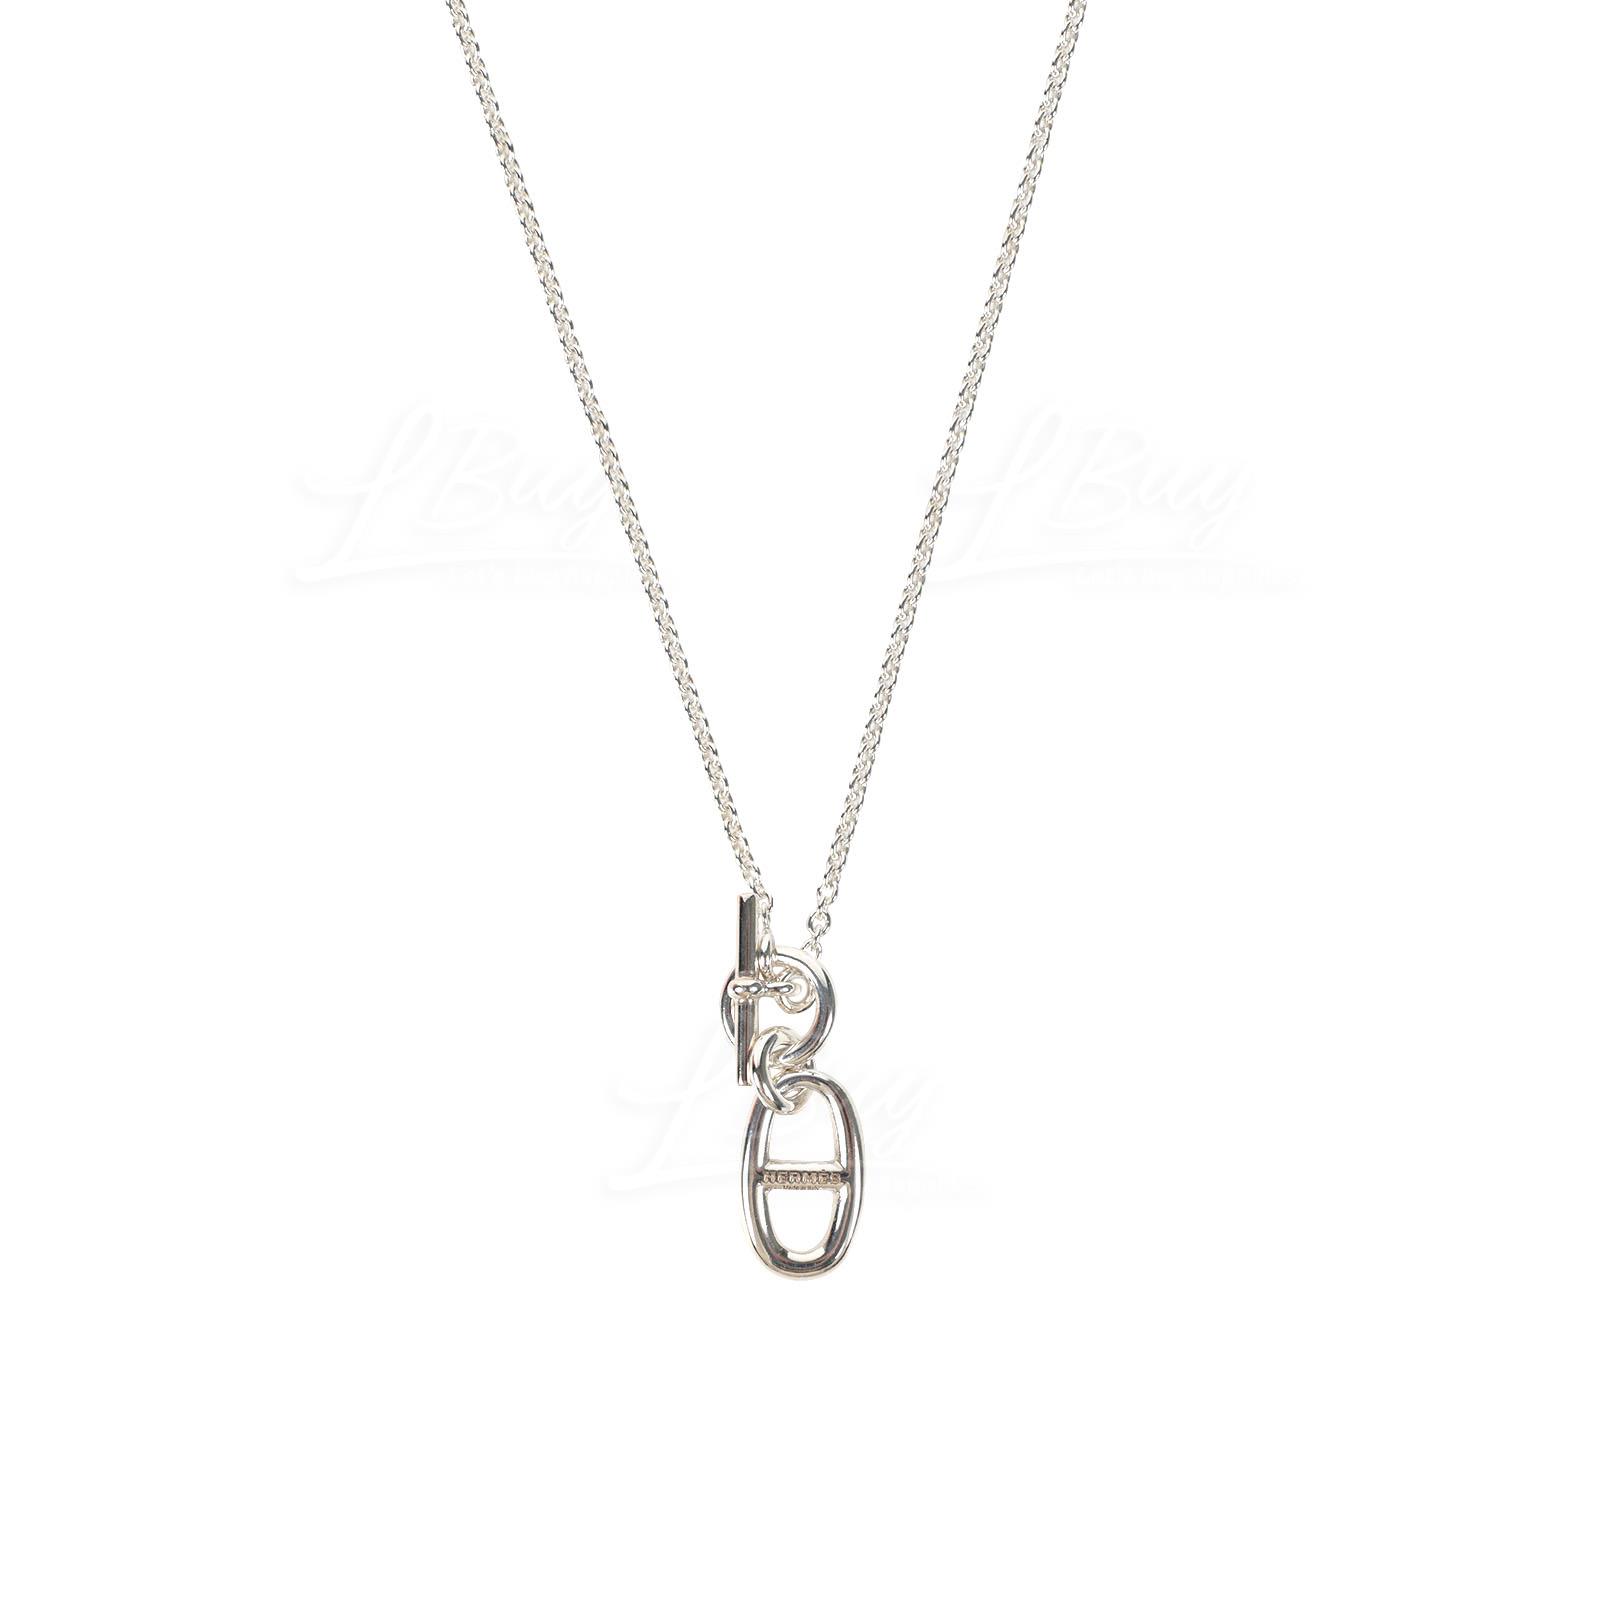 Hermes Chaine d'ancre Pendant 925 Sterling Silver Necklace